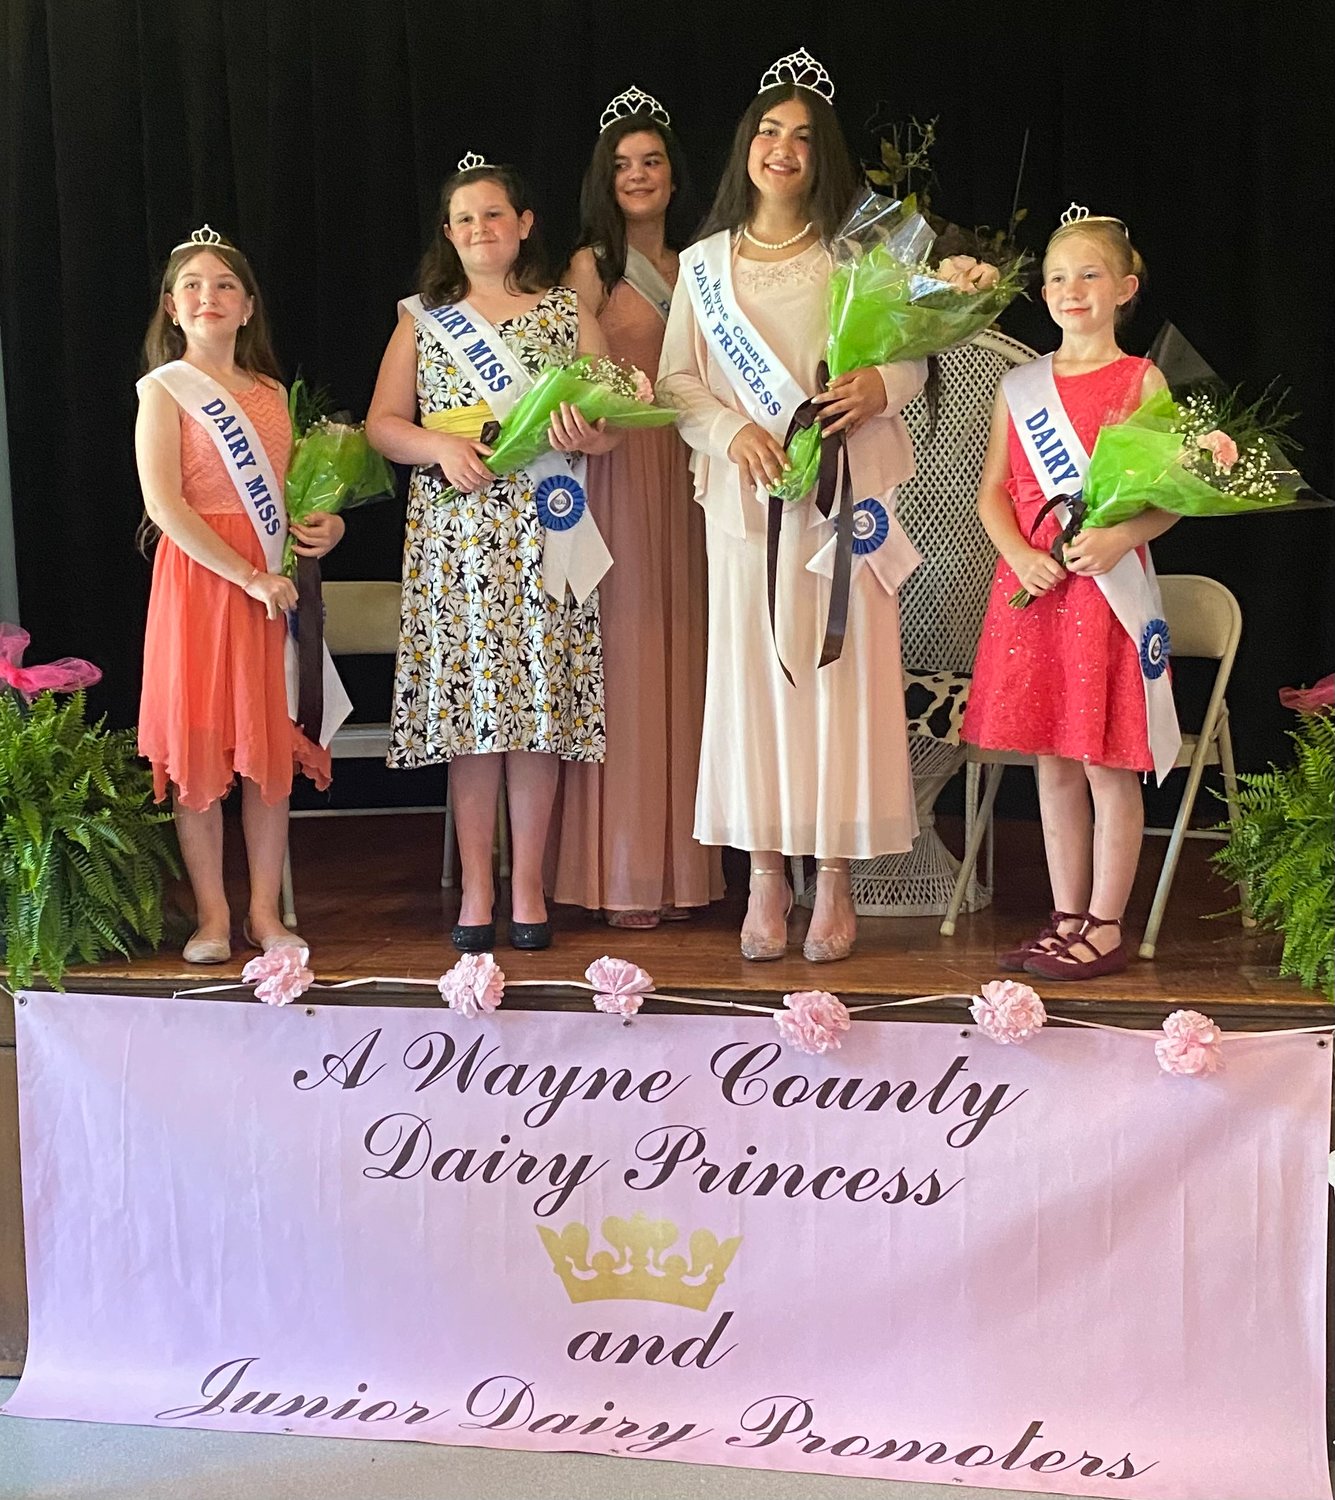 The 2022-2023 Wayne County dairy royalty. Pictured are ..Dairy Miss Zoey Tyler, left; Dairy Miss Kenley Roberts; 2021-2022 Wayne County Dairy Princess Madison Roberts; 2022-2023 Wayne County Dairy Princess Elektra Kehagias and Dairy Miss Chloe Tyler.